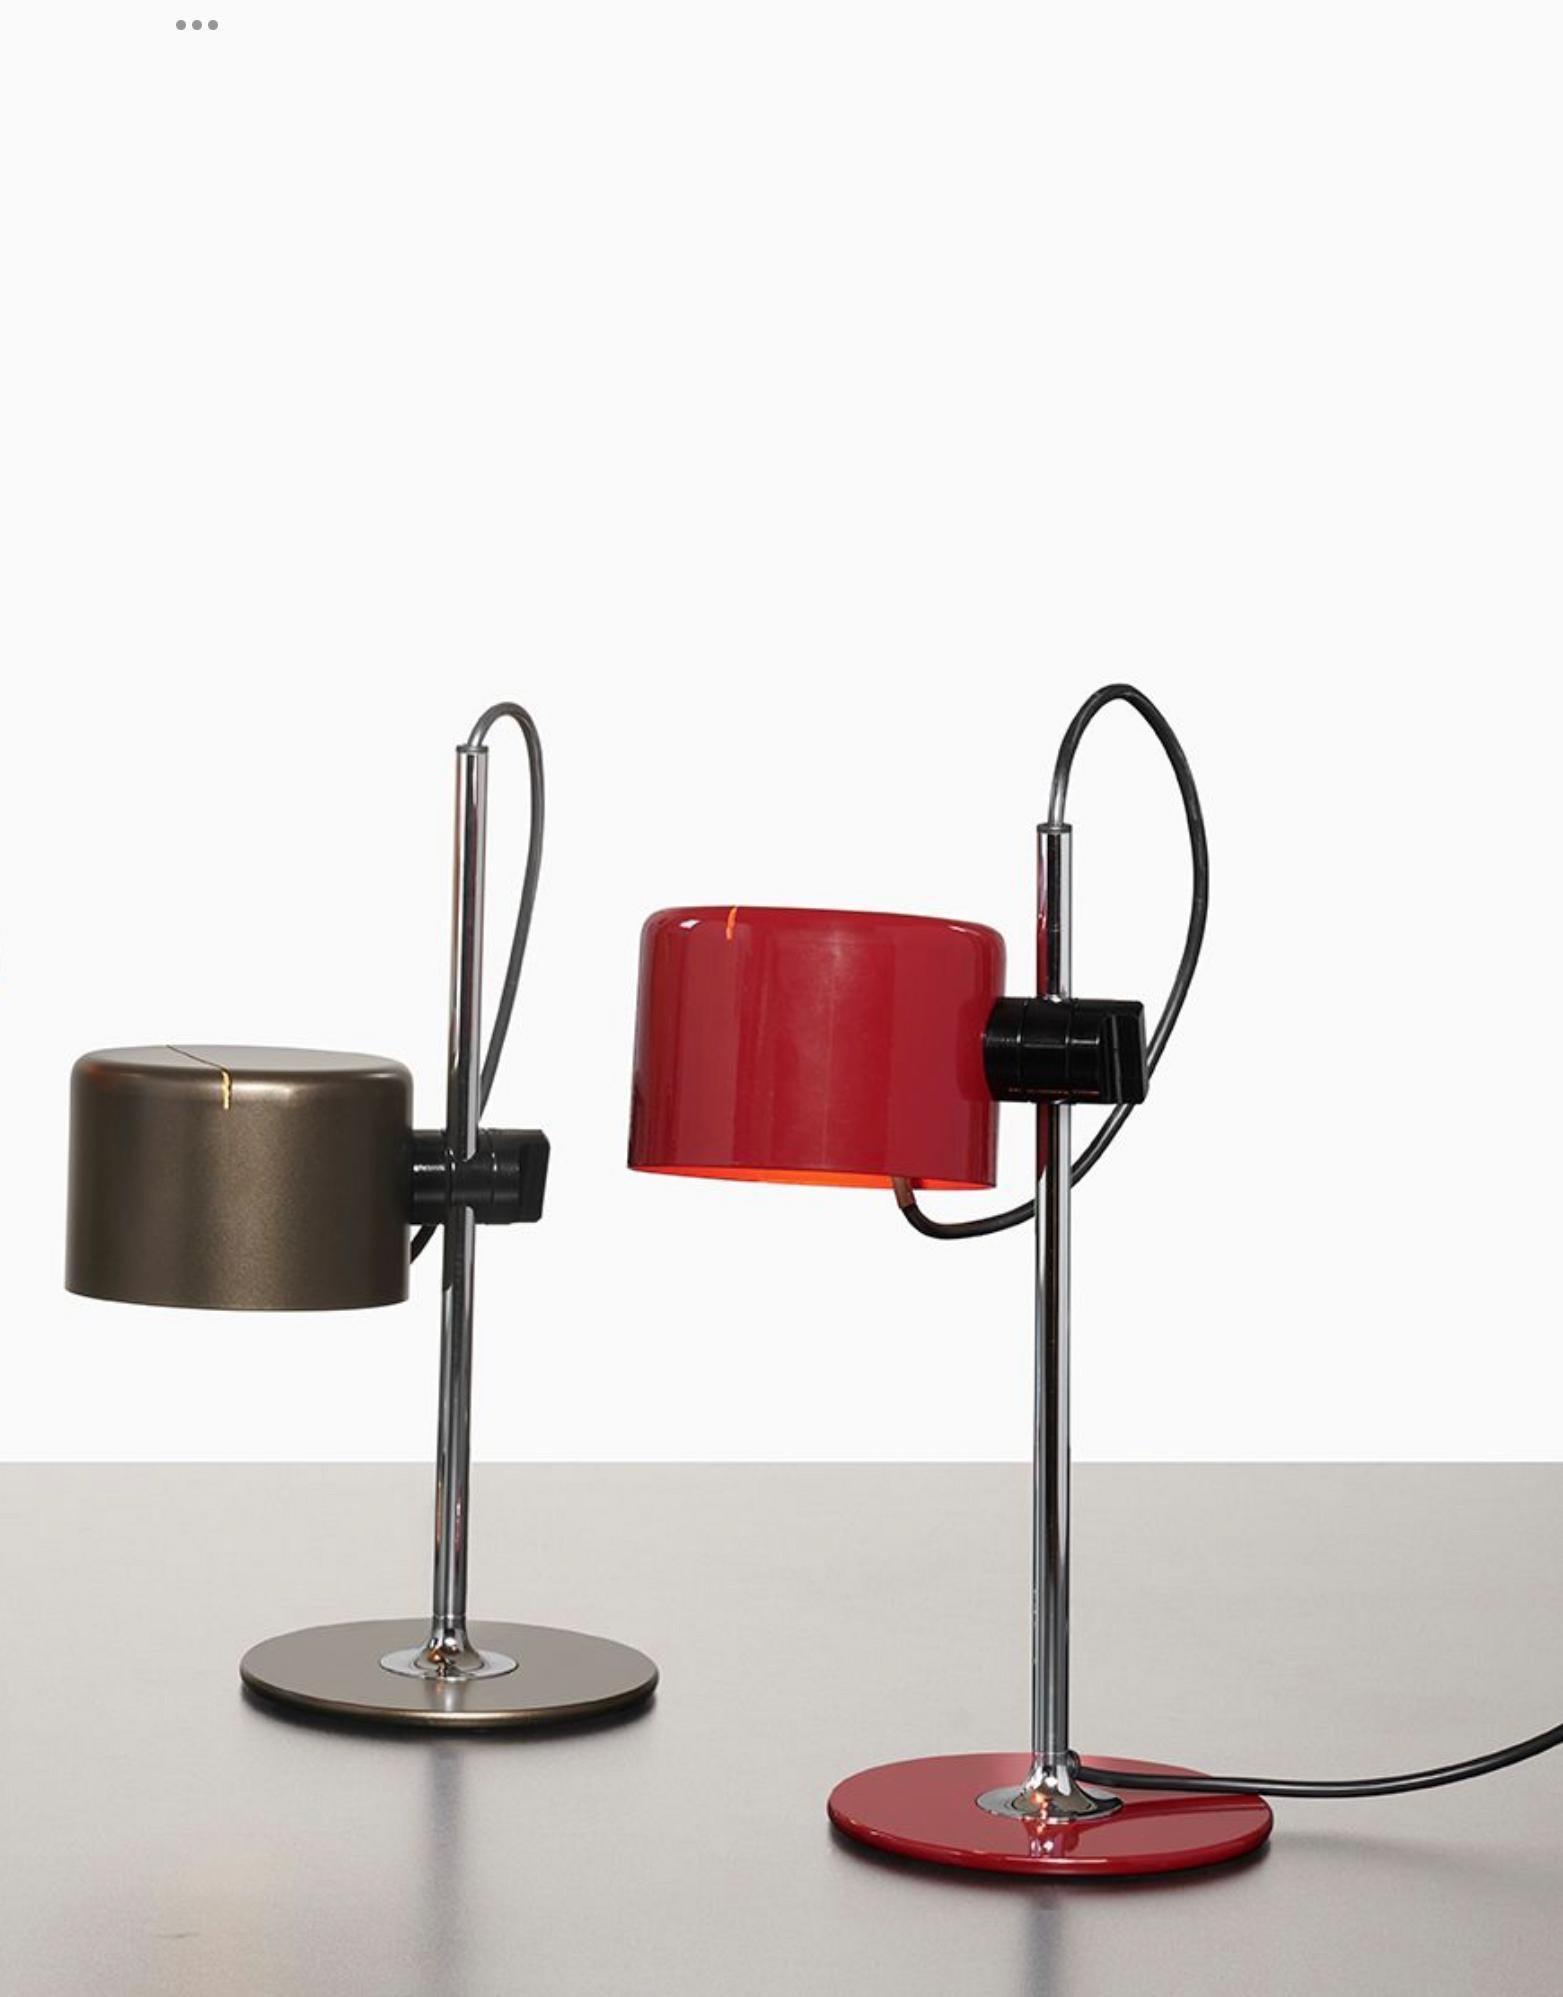 Set of Two Table Lamps model Mini Coupe designed by Joe Colombo.
Table lamp giving direct light, lacquered metal base, chromium-plated stem, adjustable reflector in lacquered aluminium.
Manufactured by Oluce, Italy.

Coupé originated in 1967 from